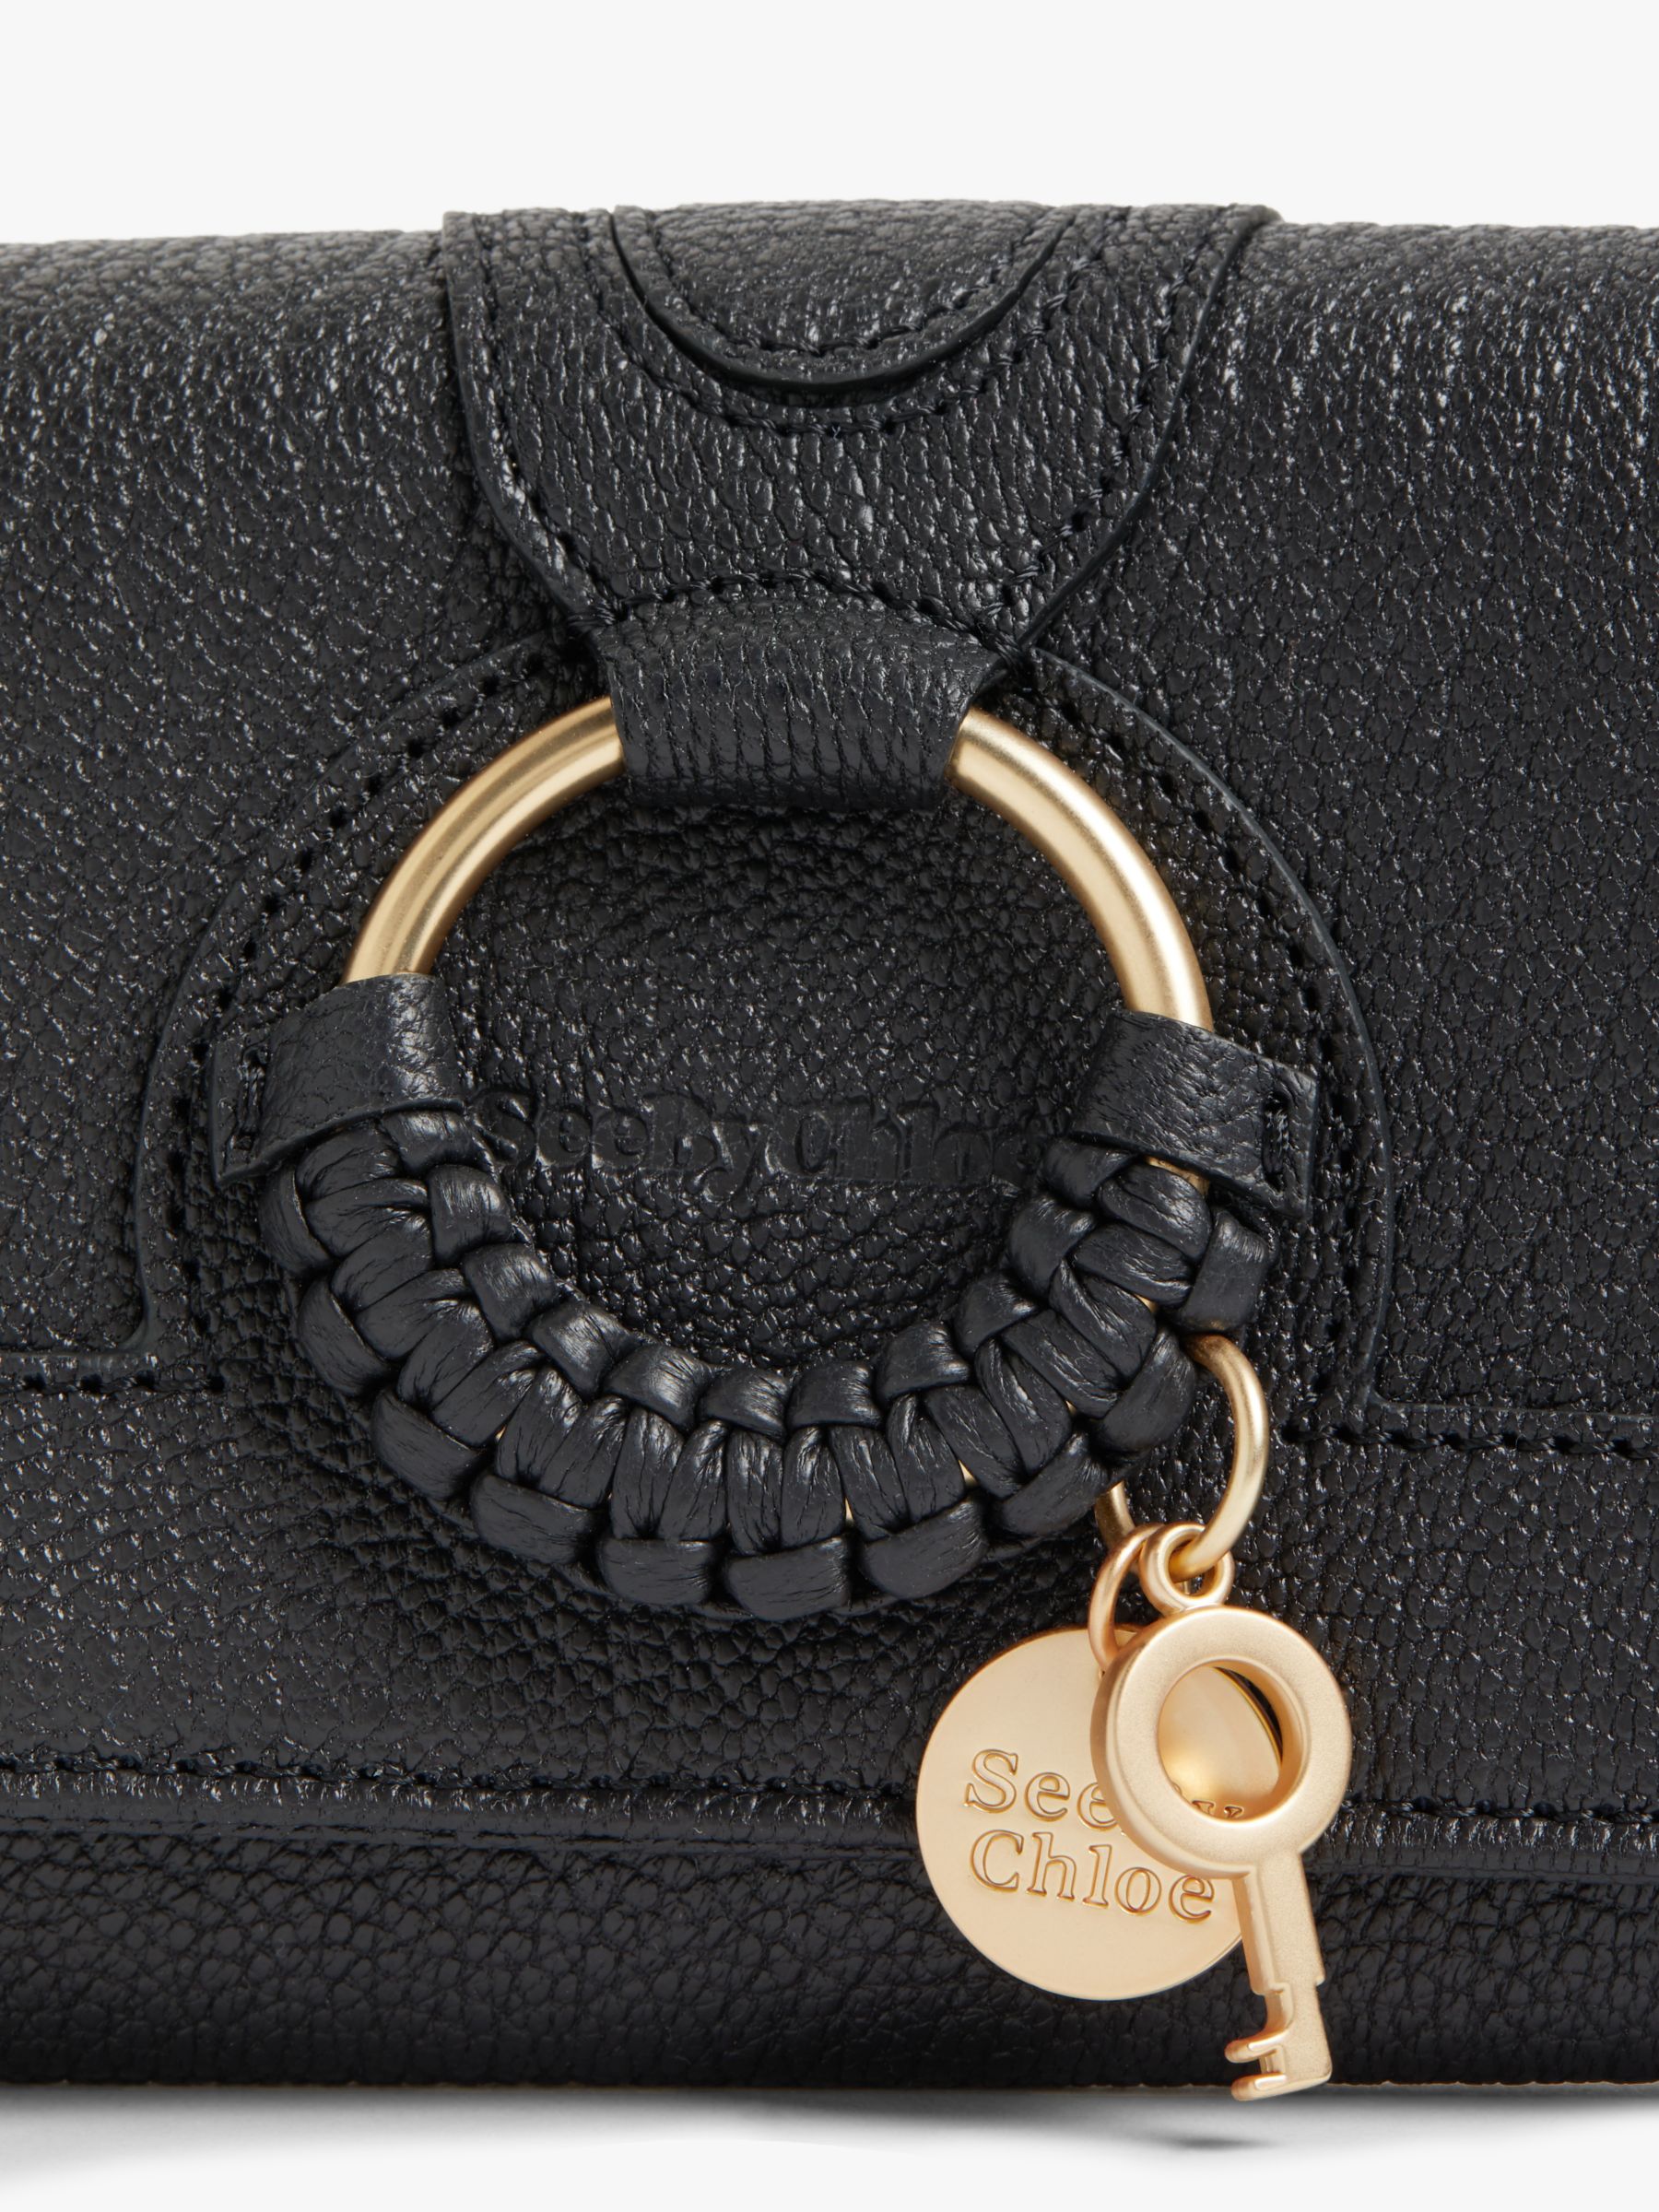 See By Chloé Hana Large Leather Purse, Black at John Lewis & Partners